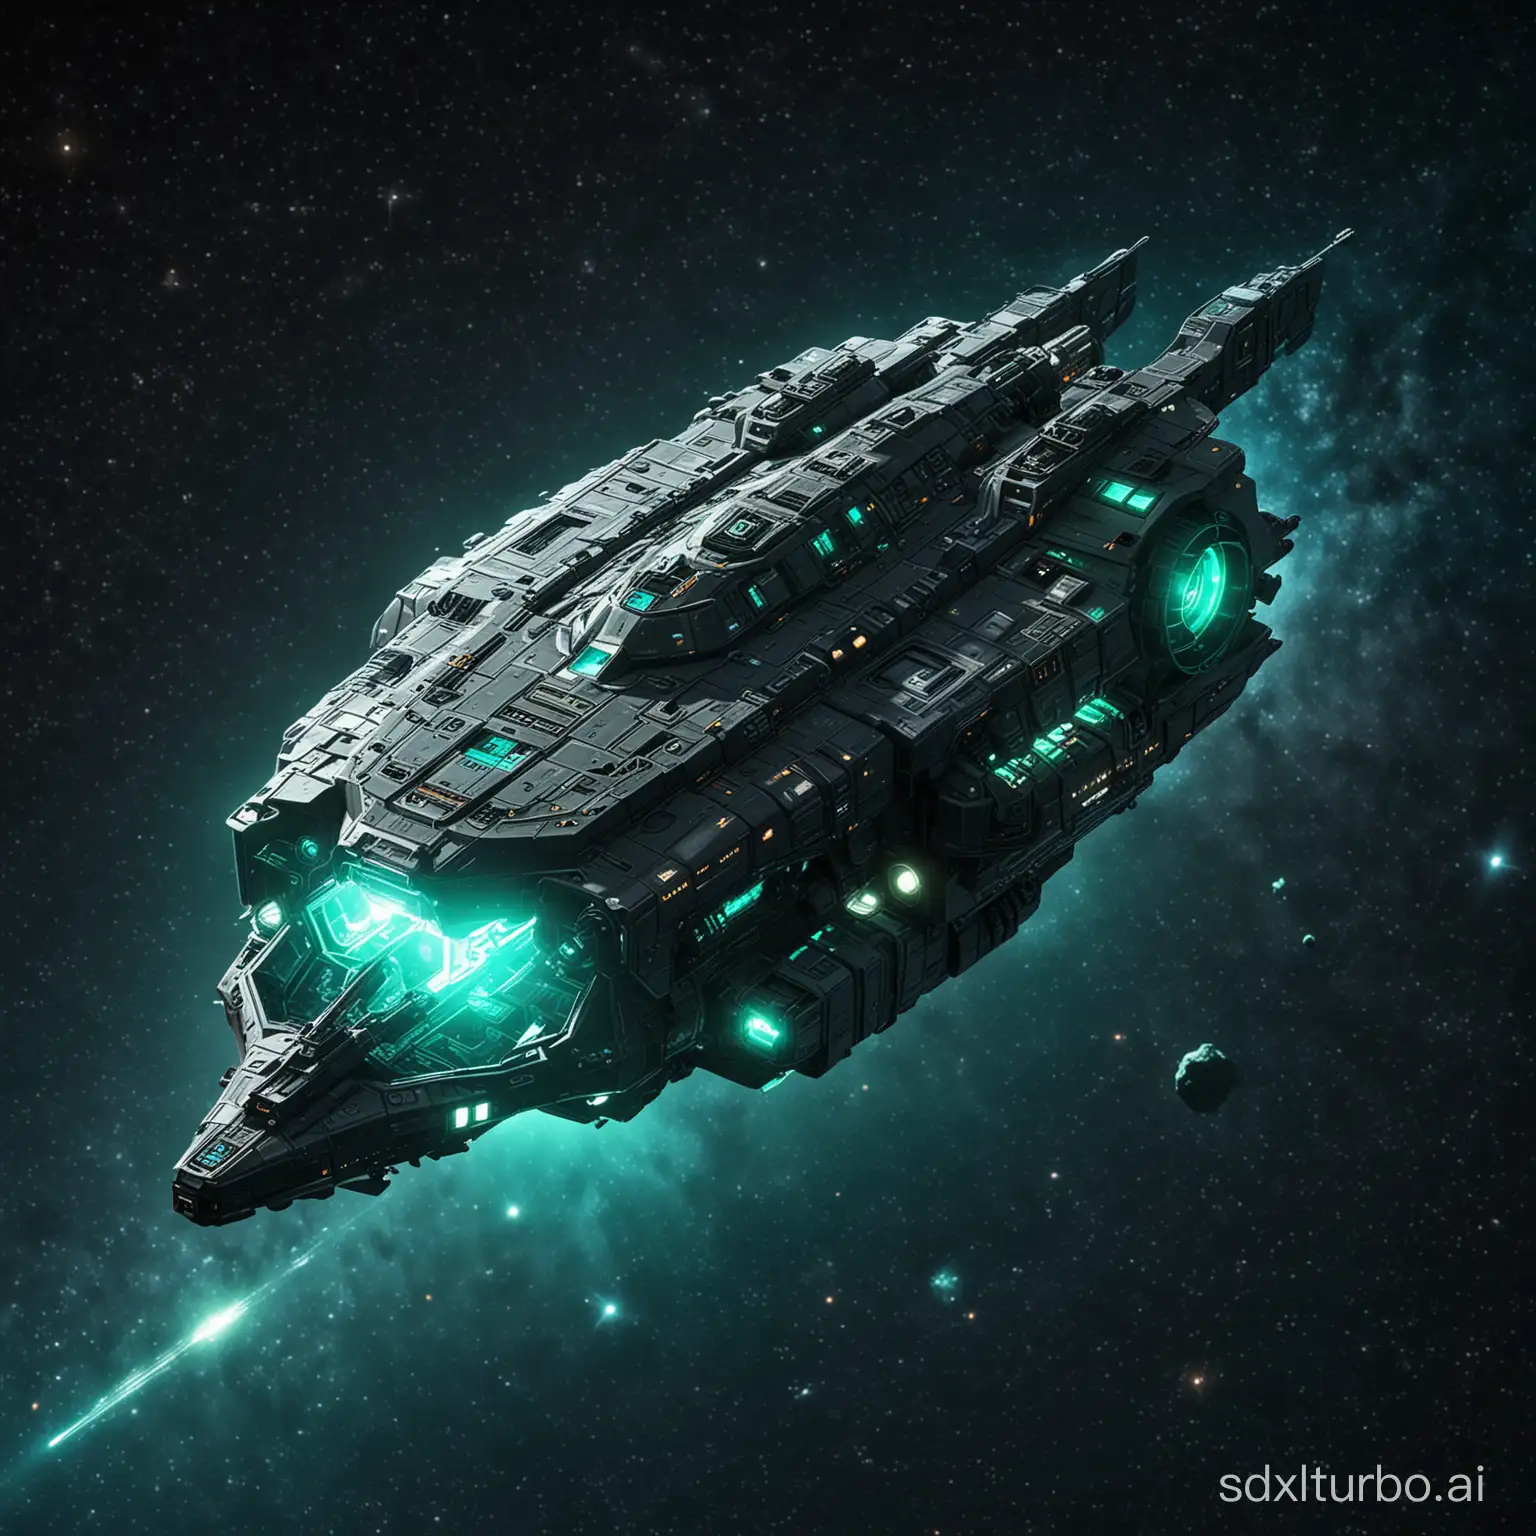 Isometric-Space-Transporter-Ship-Against-Glowing-Star-Field